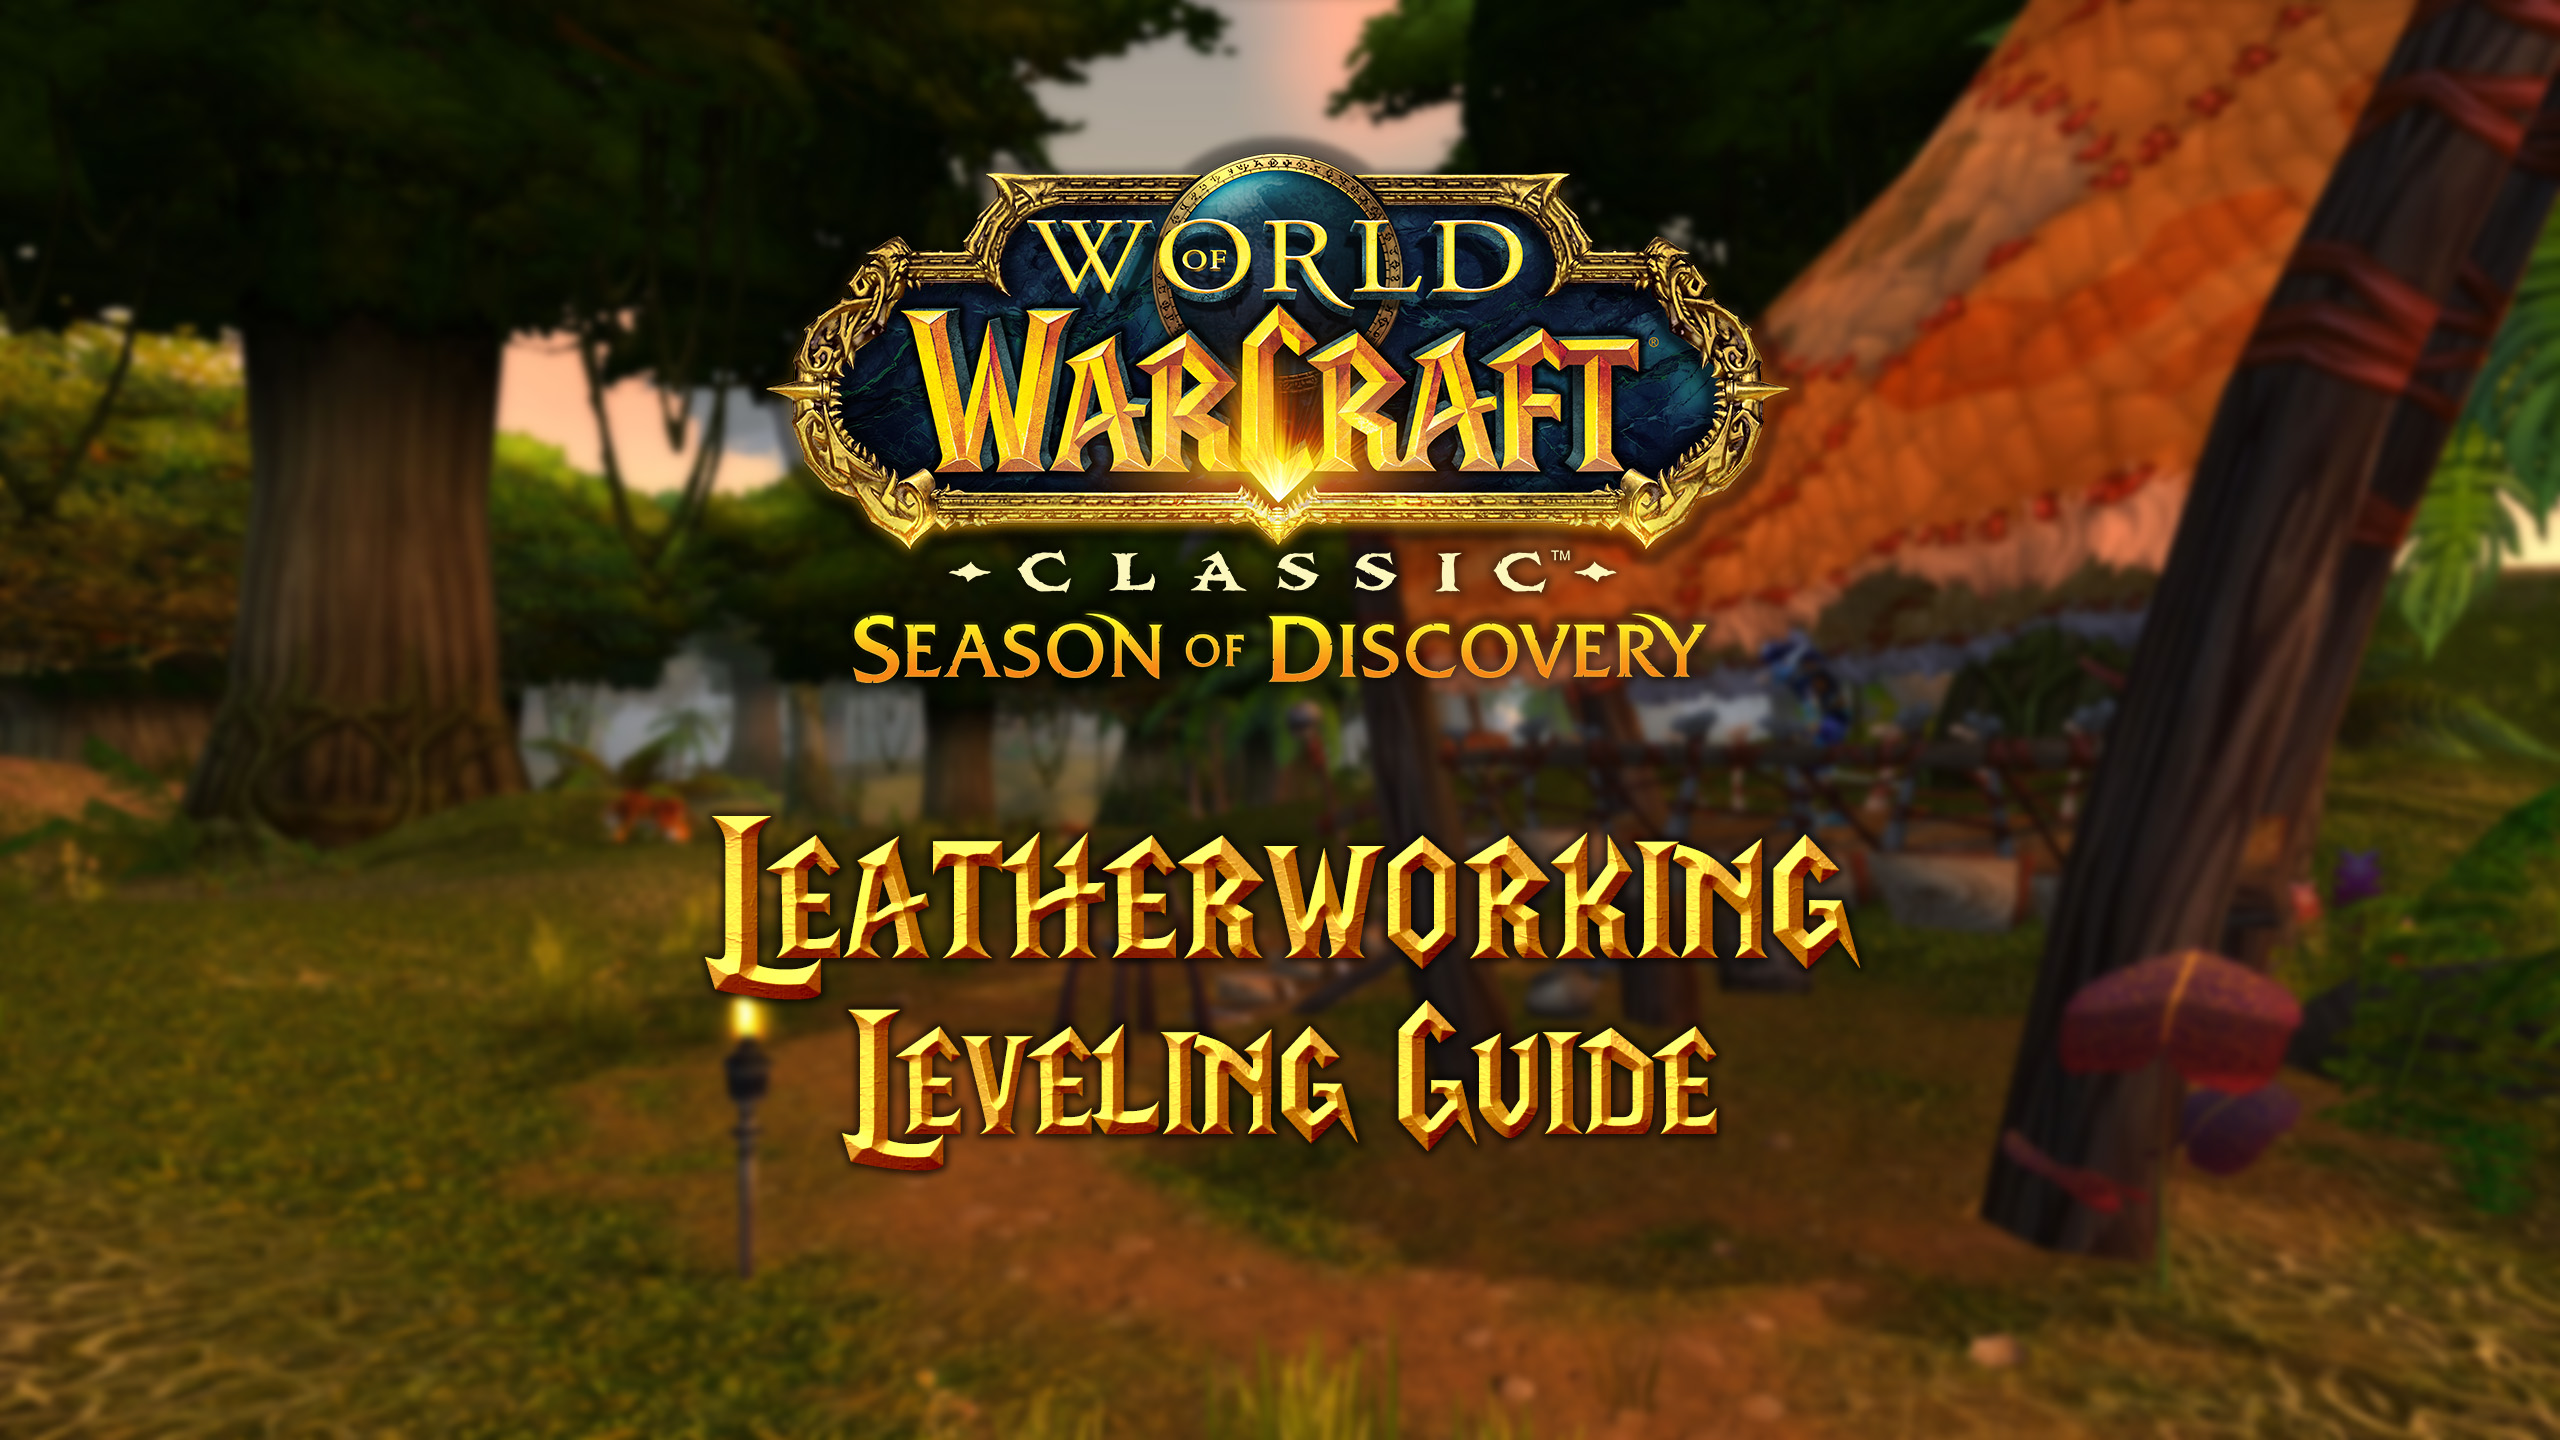 Leatherworking Leveling Guide for Season of Discovery (SoD)